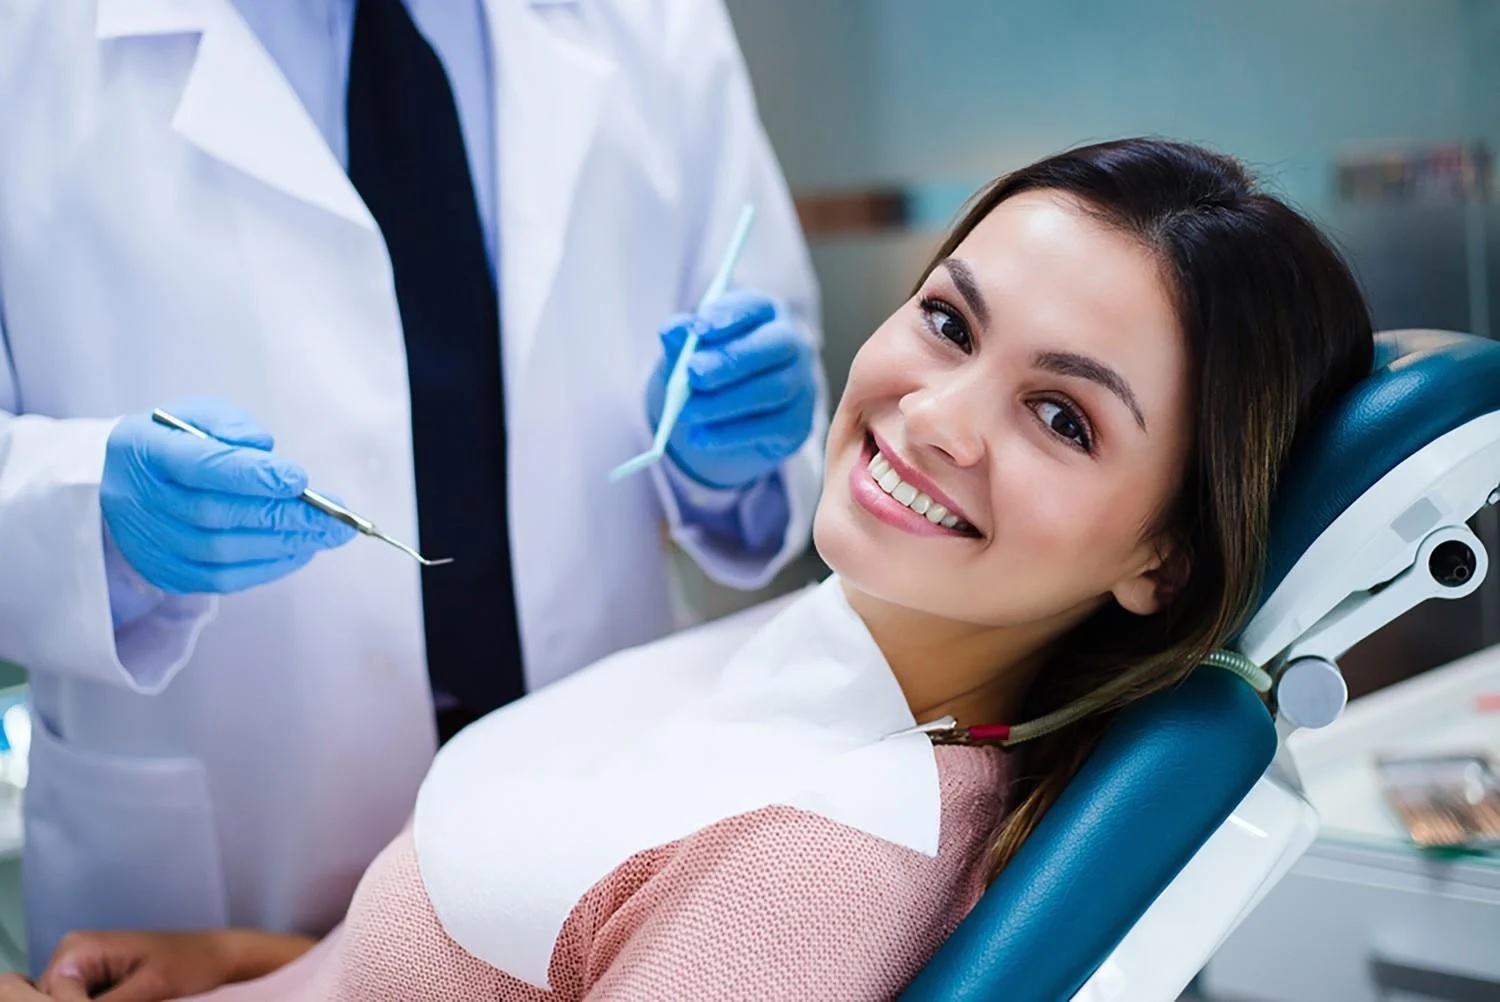 6 Questions to Ask Before Choosing a New Dentist